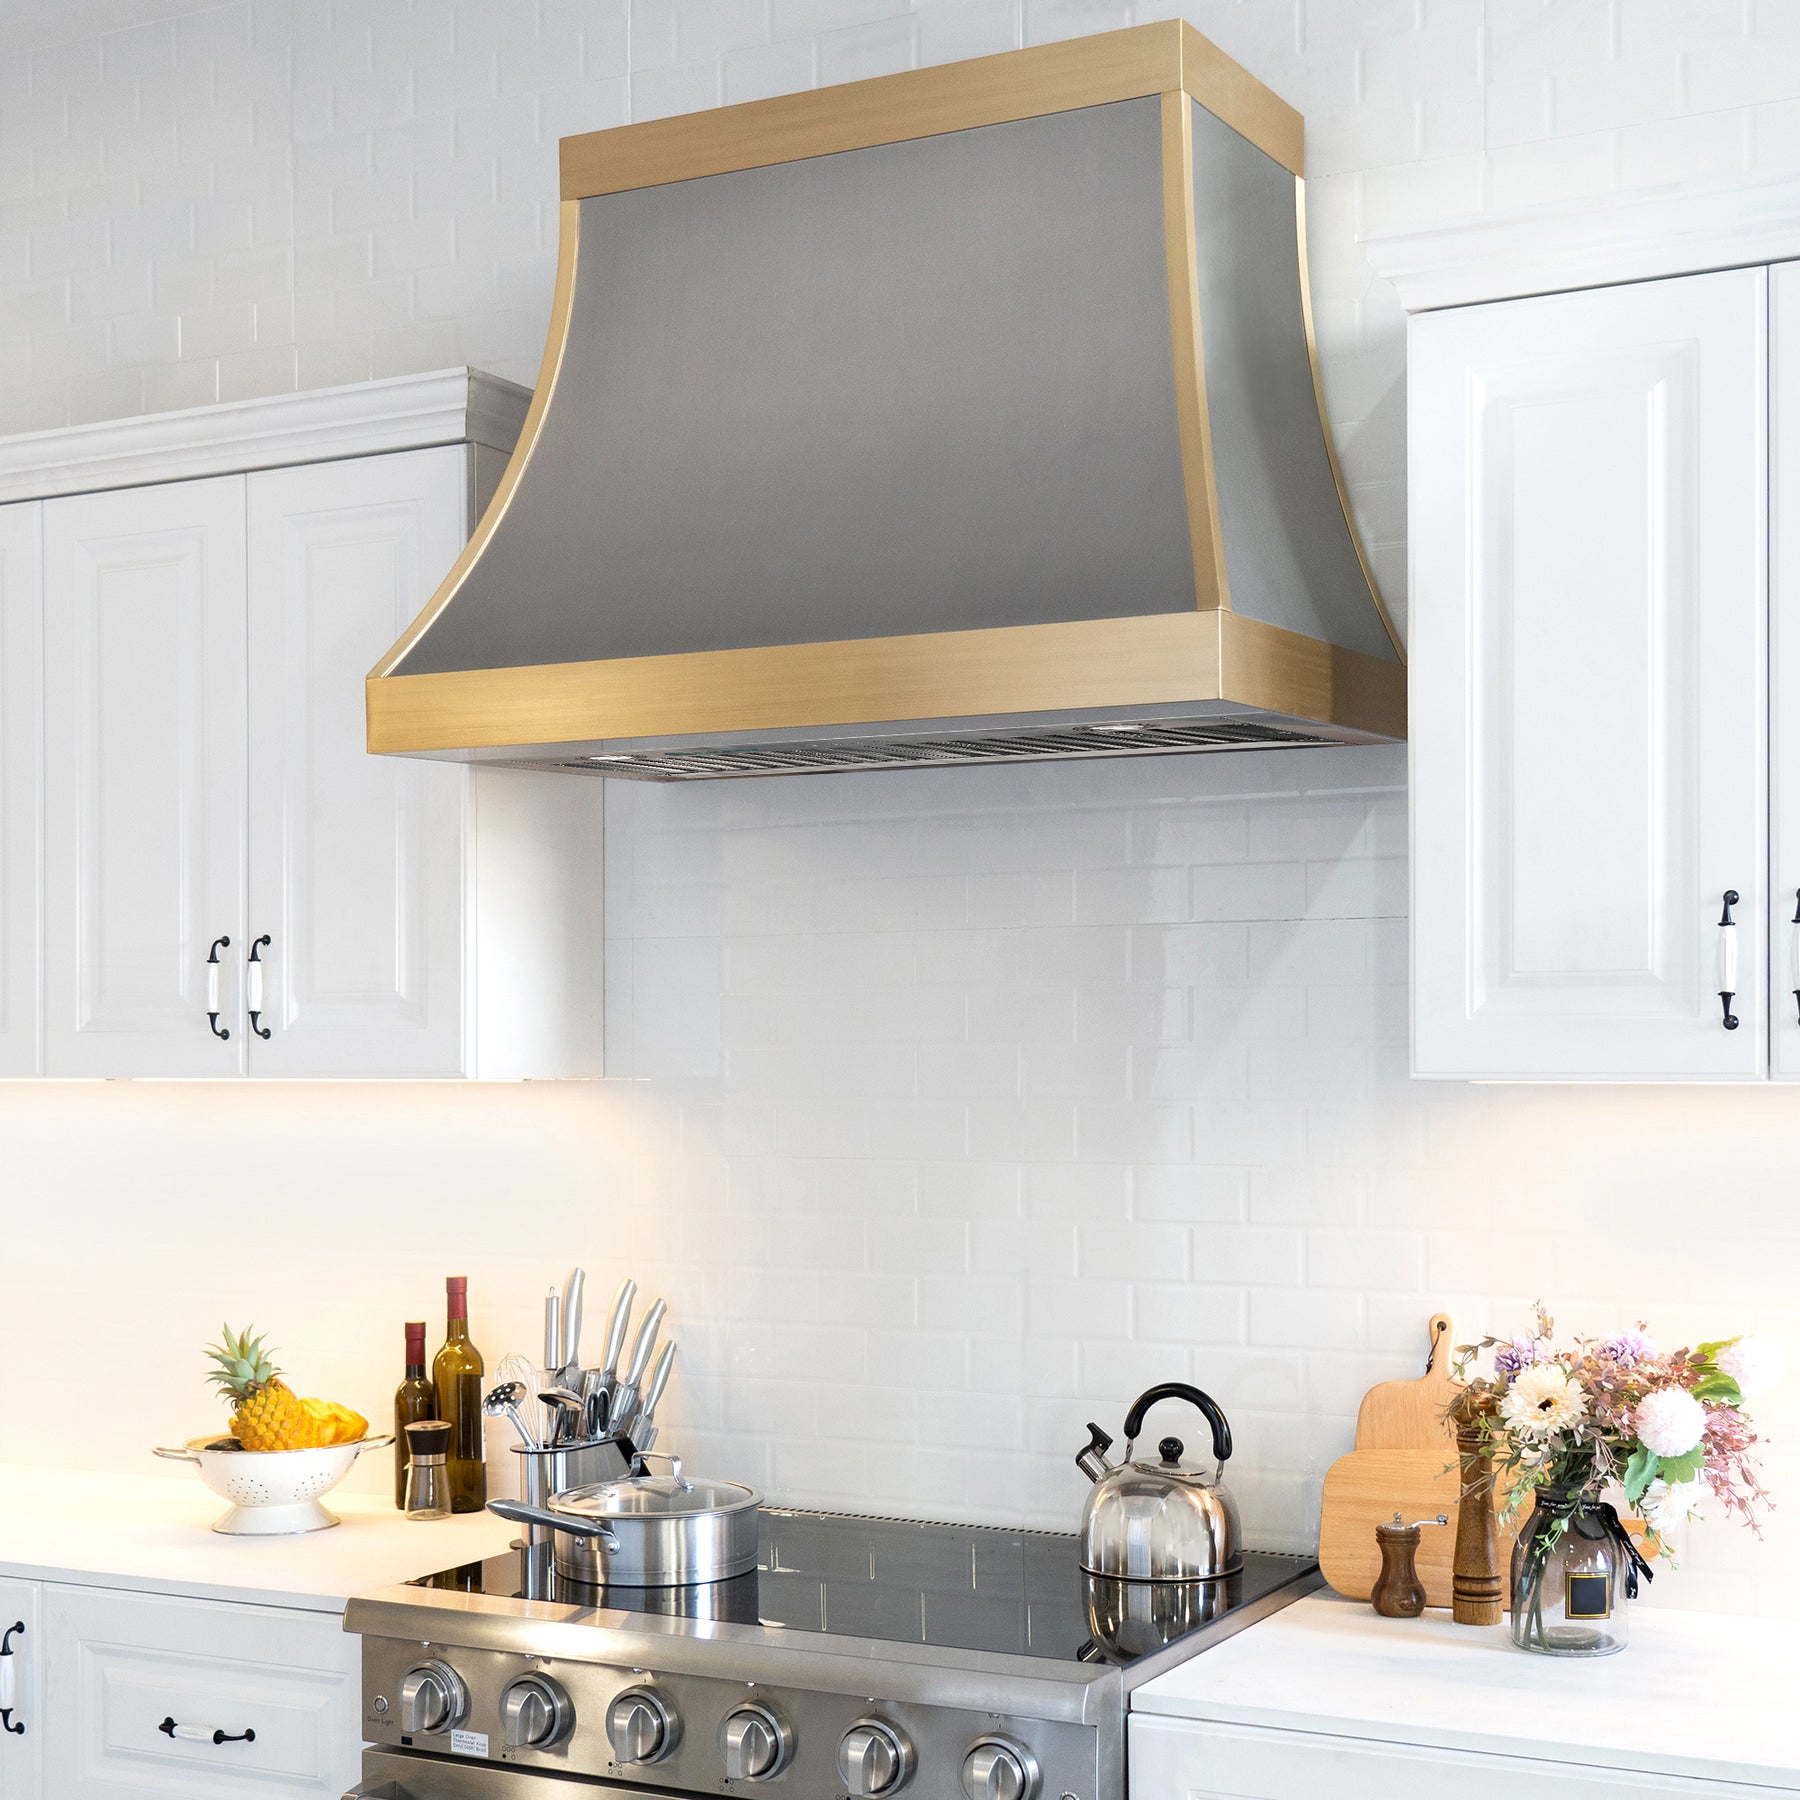 Fobest brushed stainless steel range hood with brushed brass straps